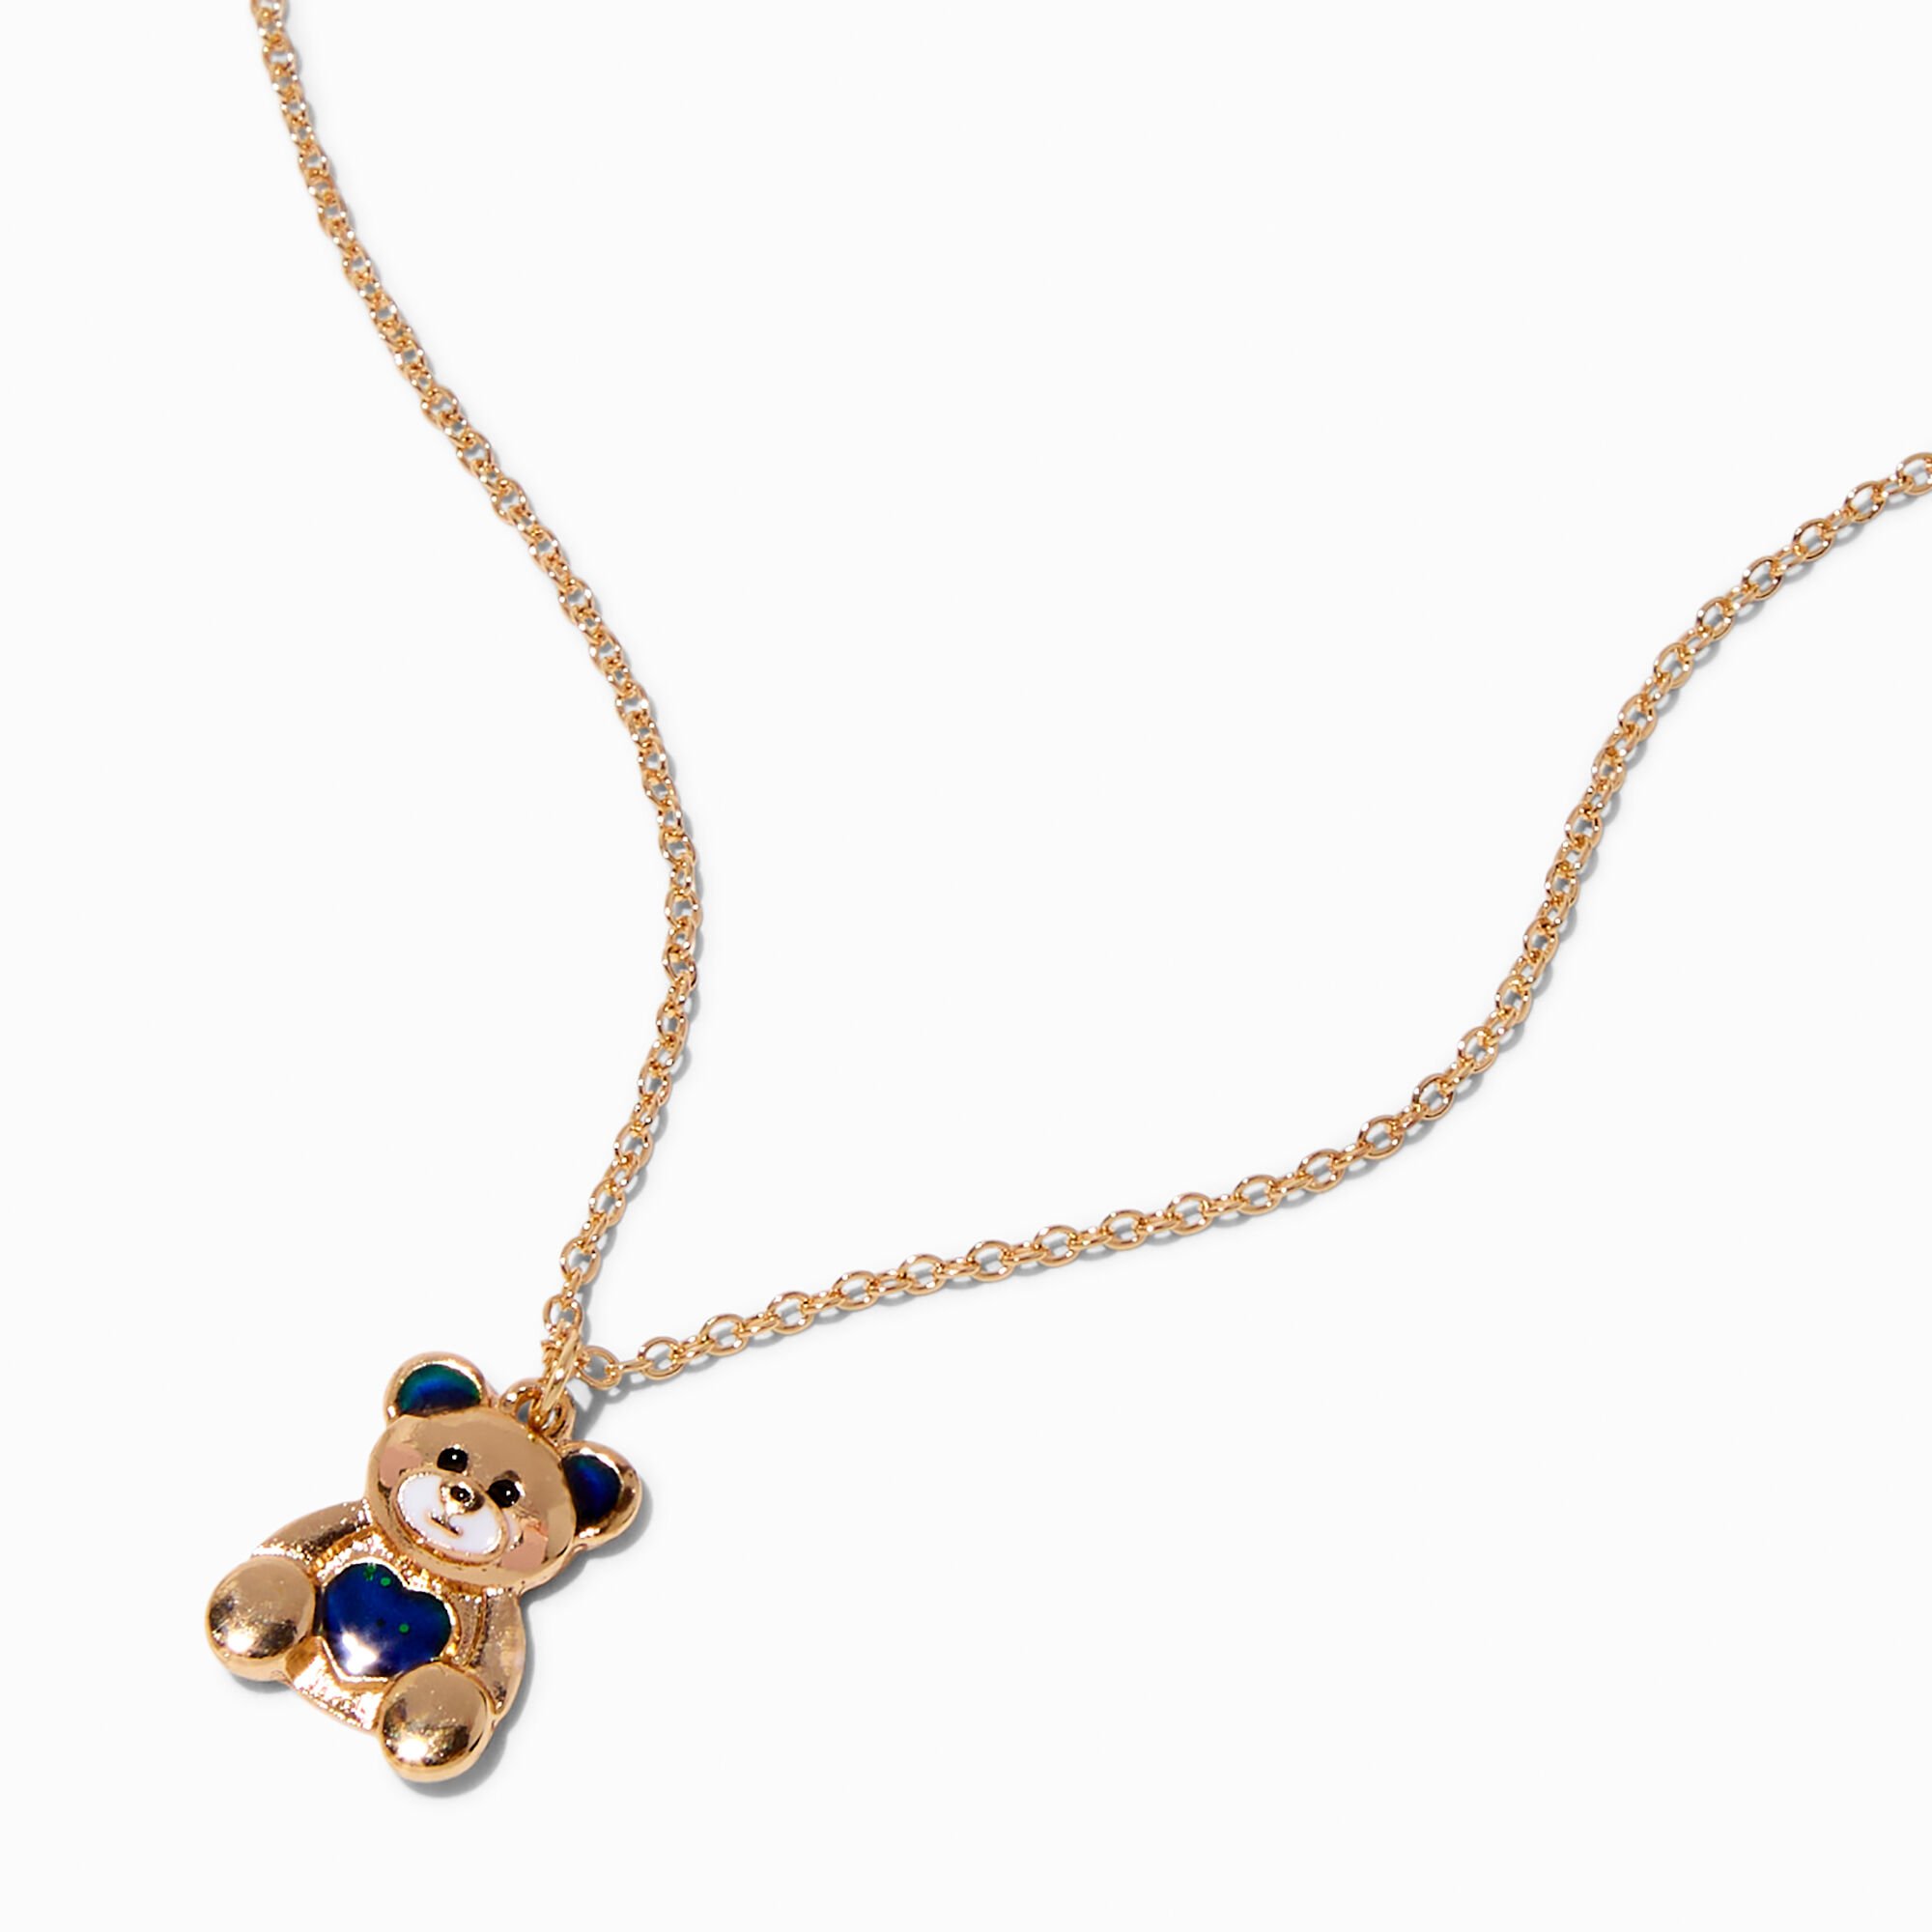 View Claires Tone Mood Teddy Bear Pendant Necklace Gold information